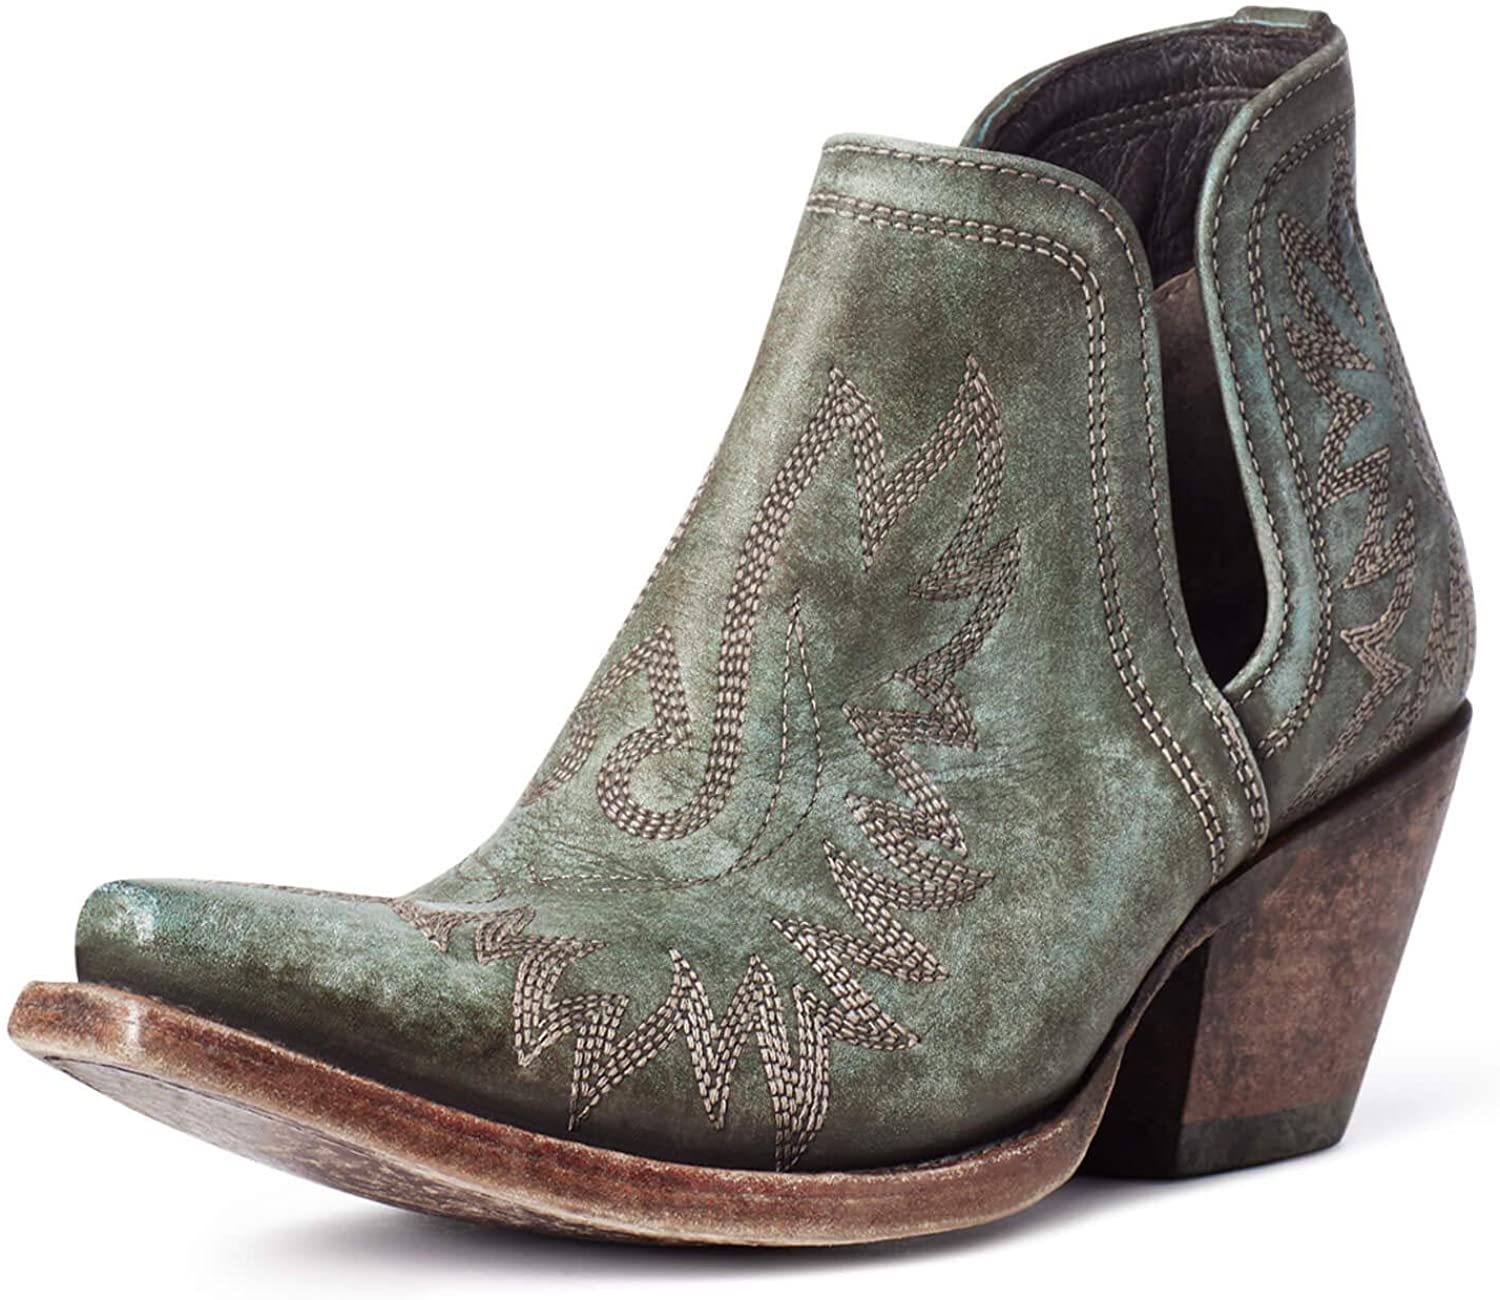 Women's Ariat Dixon Western Boot in Distressed Turquoise from the front